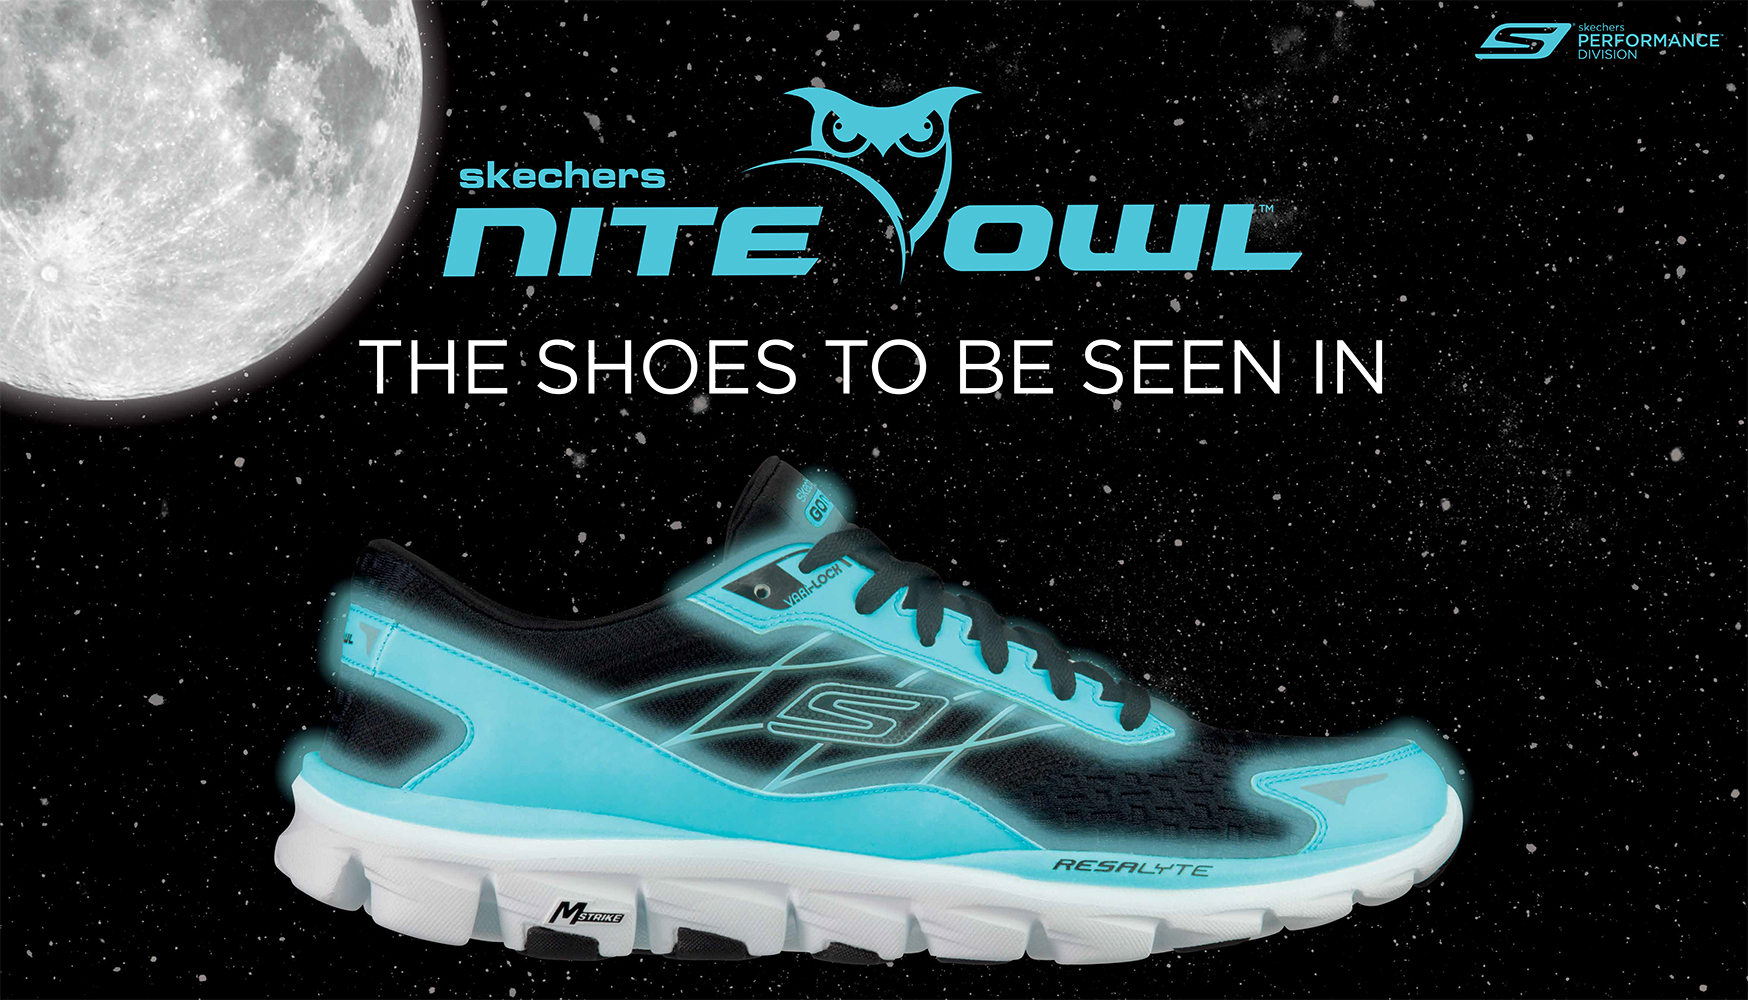 Krympe velstand Tung lastbil Skechers Performance Division Debuts the Nite Owl Footwear Collection |  Business Wire